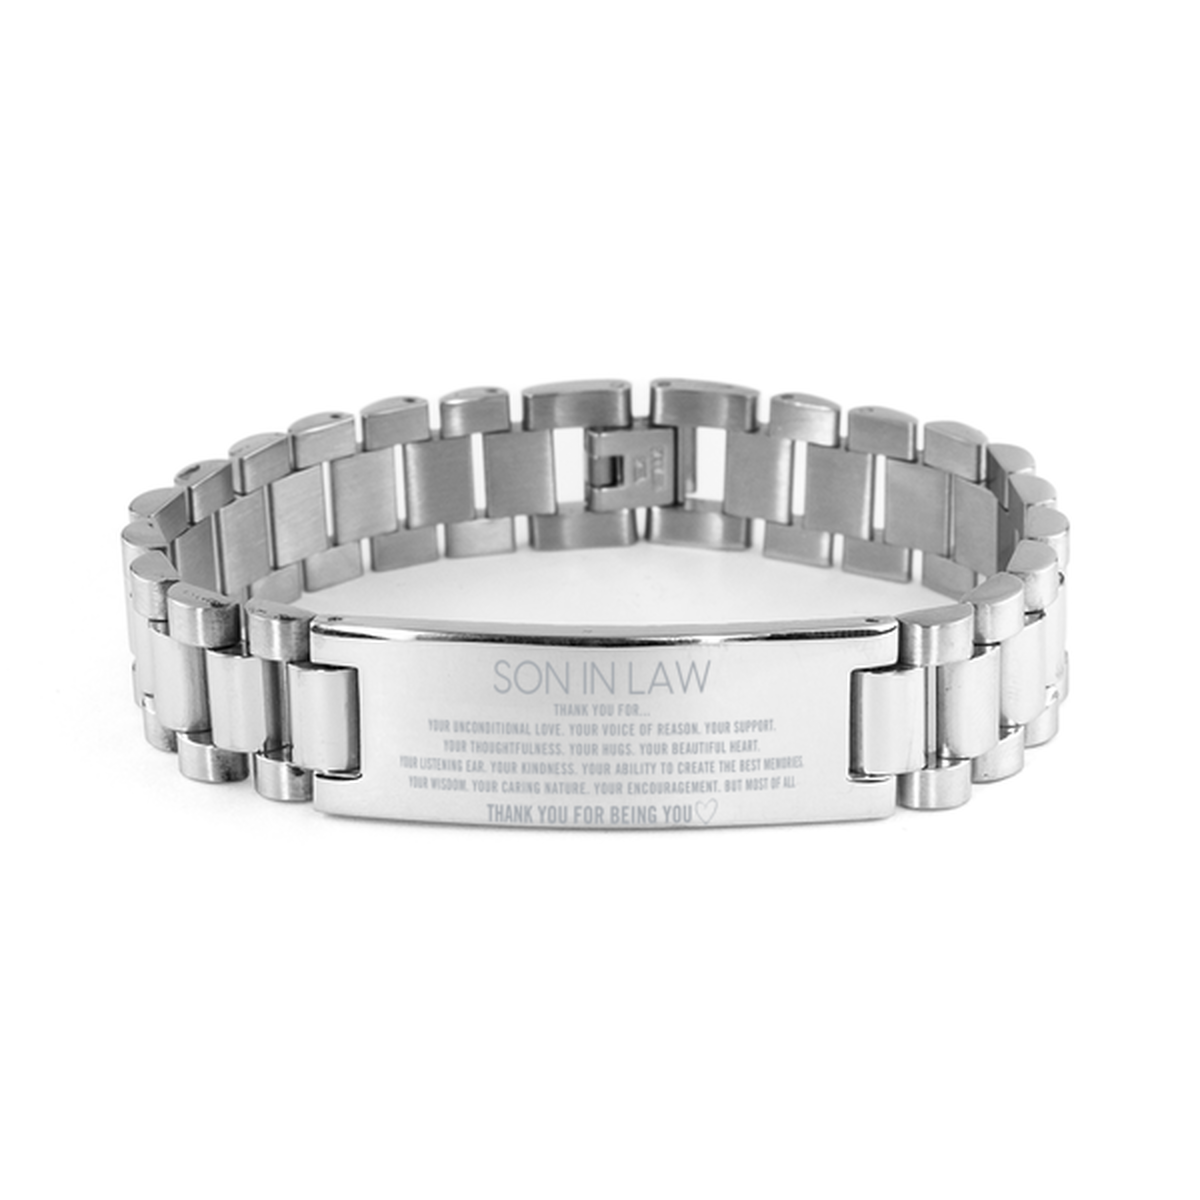 Son In Law Ladder Stainless Steel Bracelet Custom, Engraved Gifts For Son In Law Christmas Graduation Birthday Gifts for Men Women Son In Law Thank you for Your unconditional love